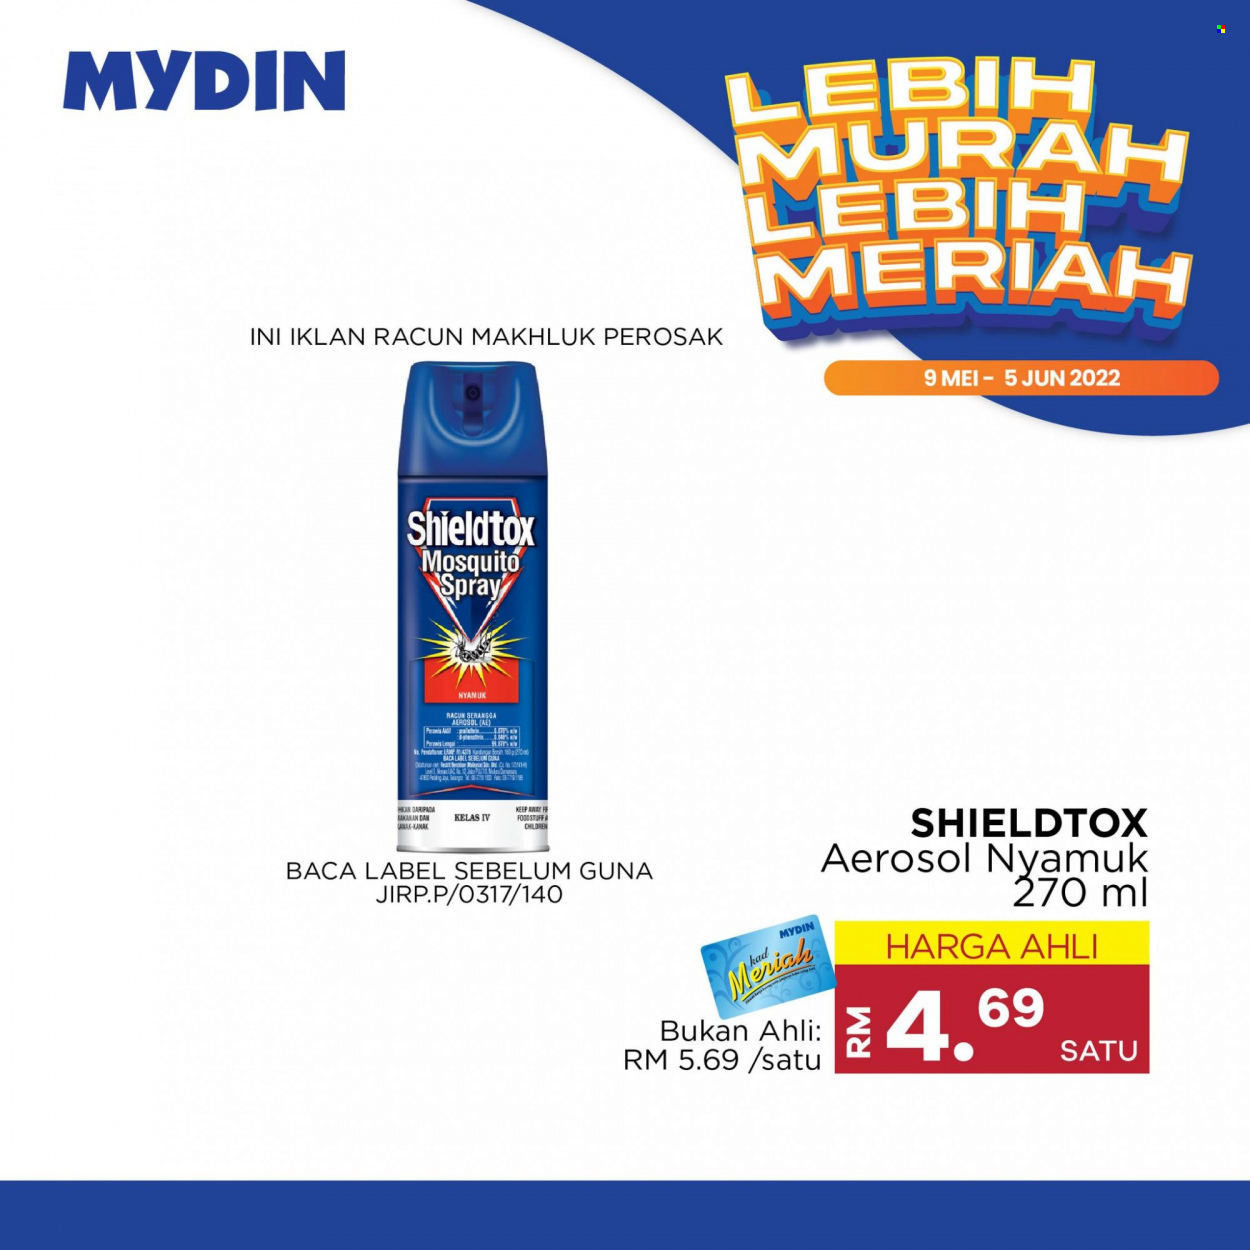 Mydin catalogue  - 09 May 2022 - 05 June 2022. Page 7.